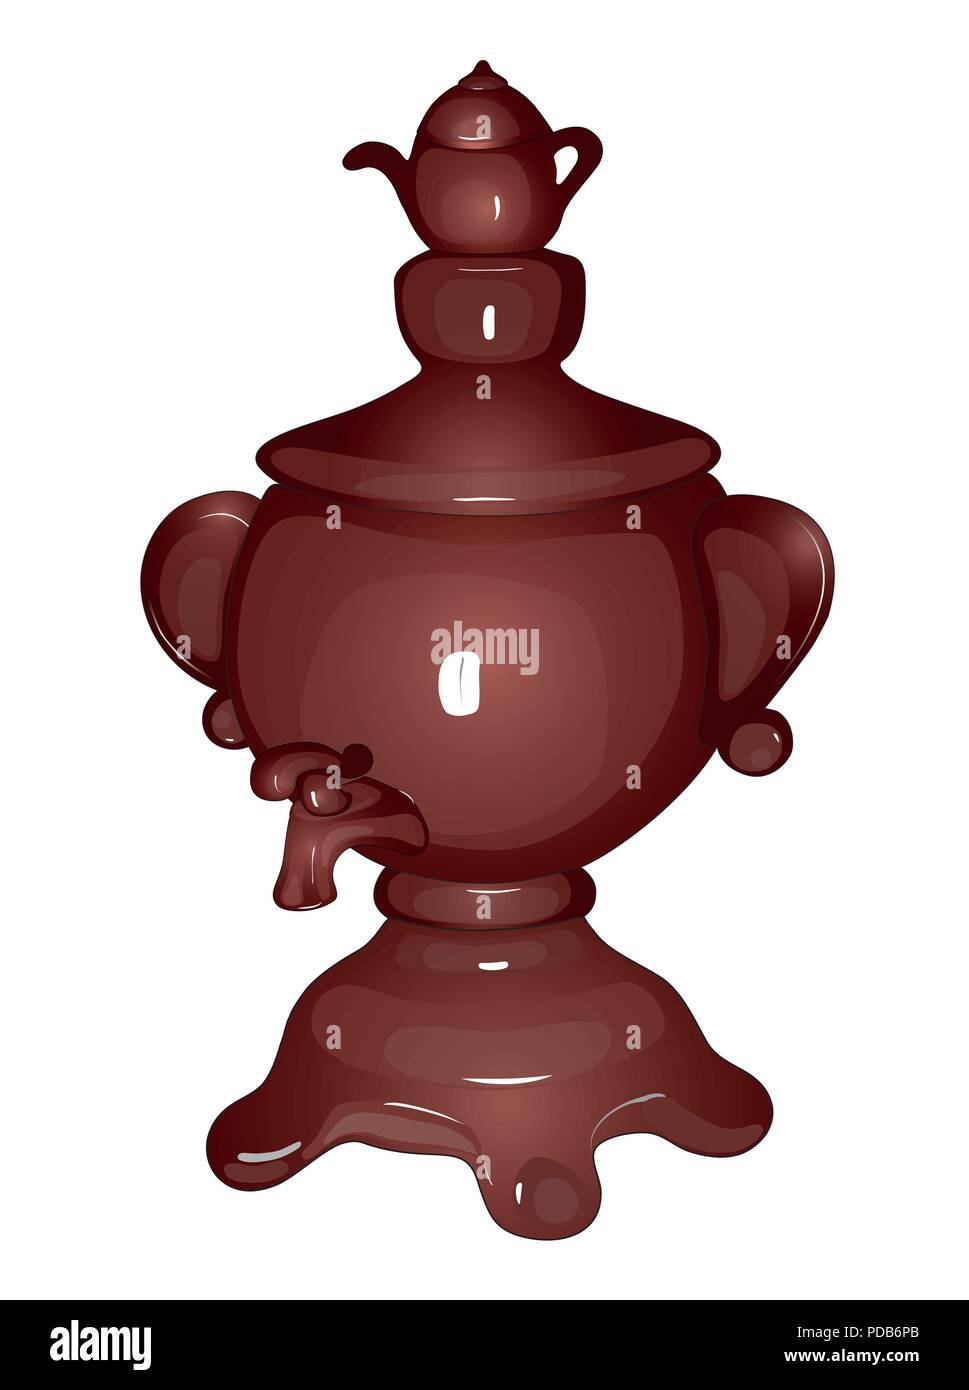 Realistic drawing of a ceramic samovar. Russian, traditional samovar, drinking Utensils, Isolated, white, Vector. 3d Stock Vector